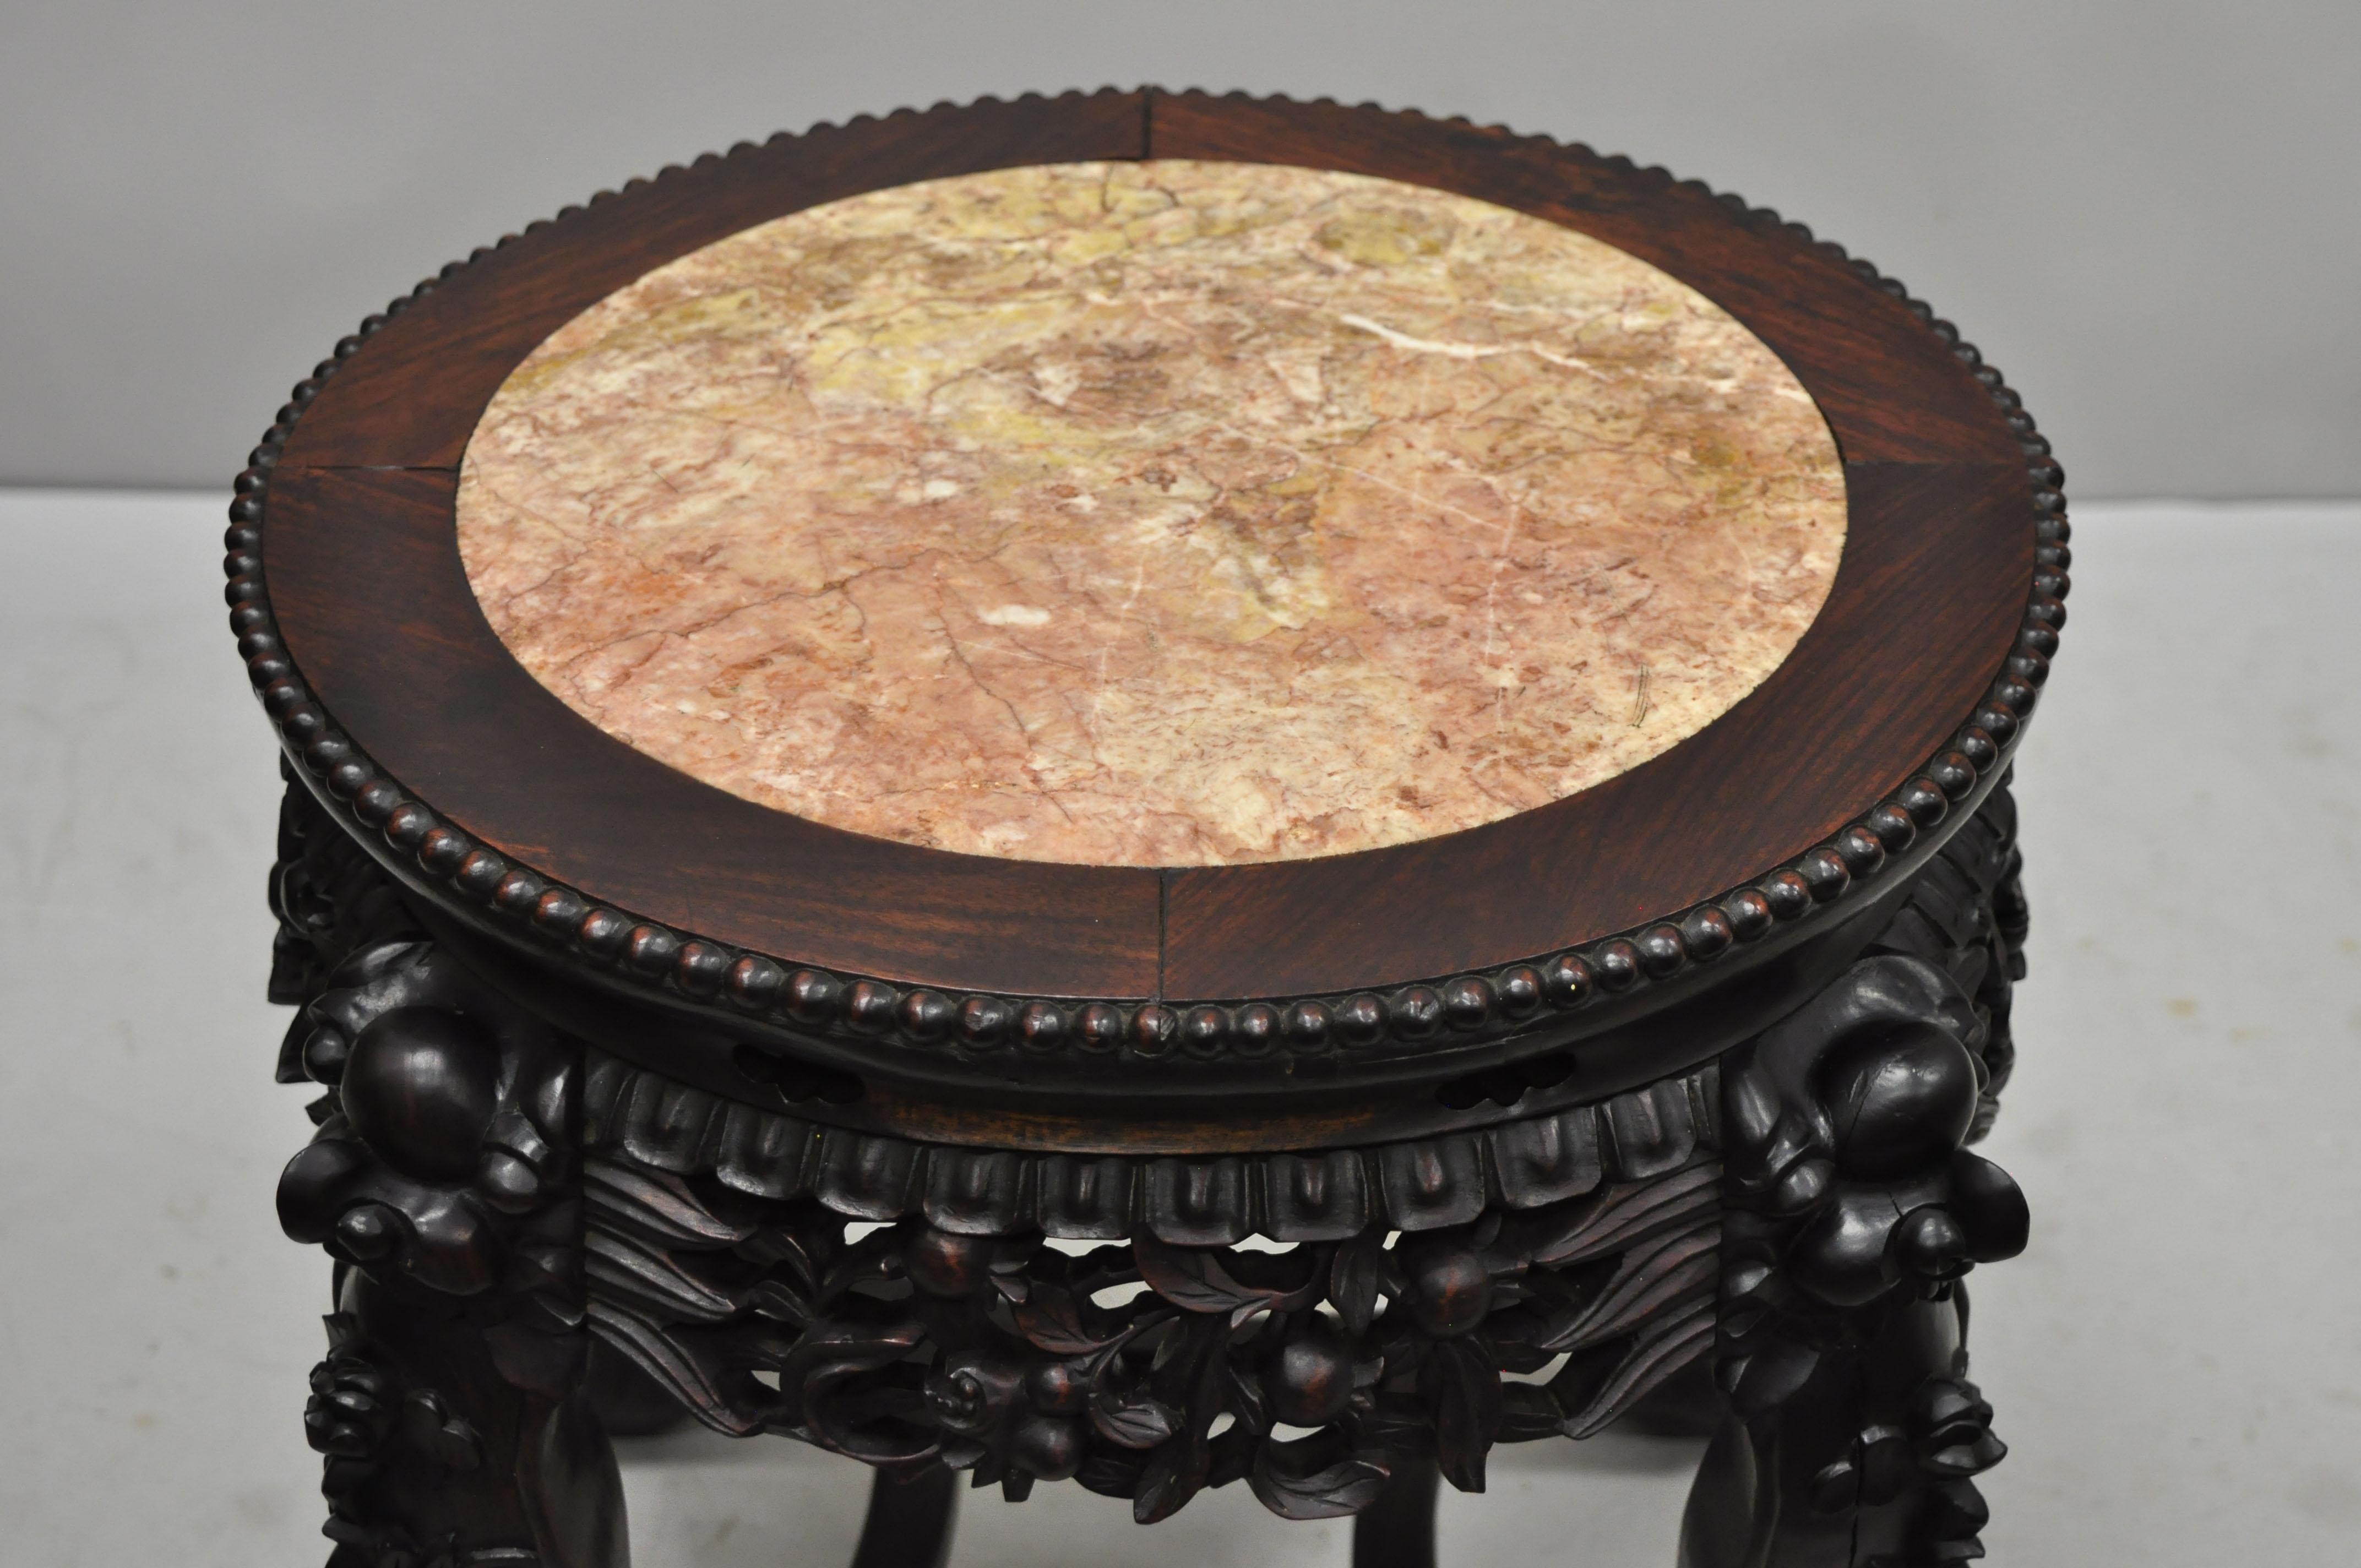 Chinoiserie Antique Carved Hardwood Rosewood Marble-Top Chinese Pedestal Table Plant Stand B